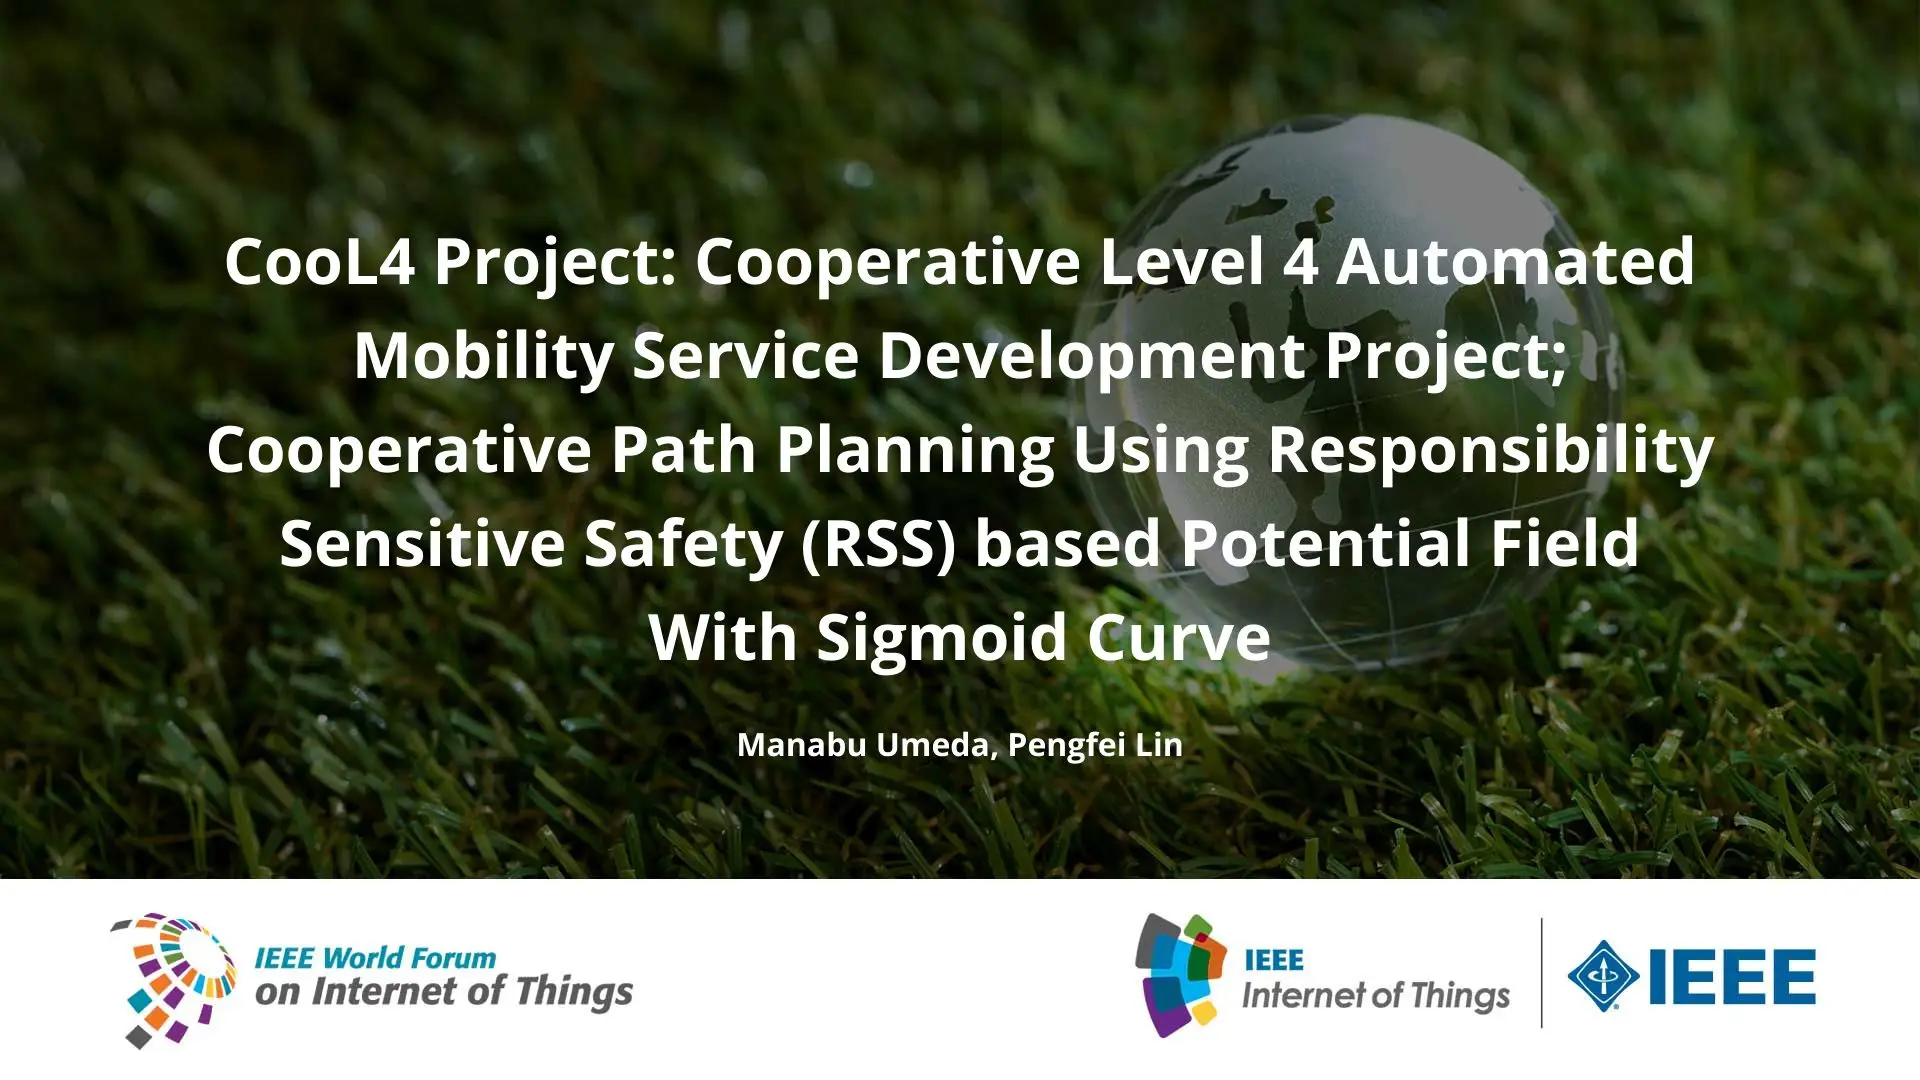 CooL4 Project: Cooperative Level 4 Automated Mobility Service Development Project; Cooperative Path Planning Using Responsibility Sensitive Safety (RSS) based Potential Field With Sigmoid Curve